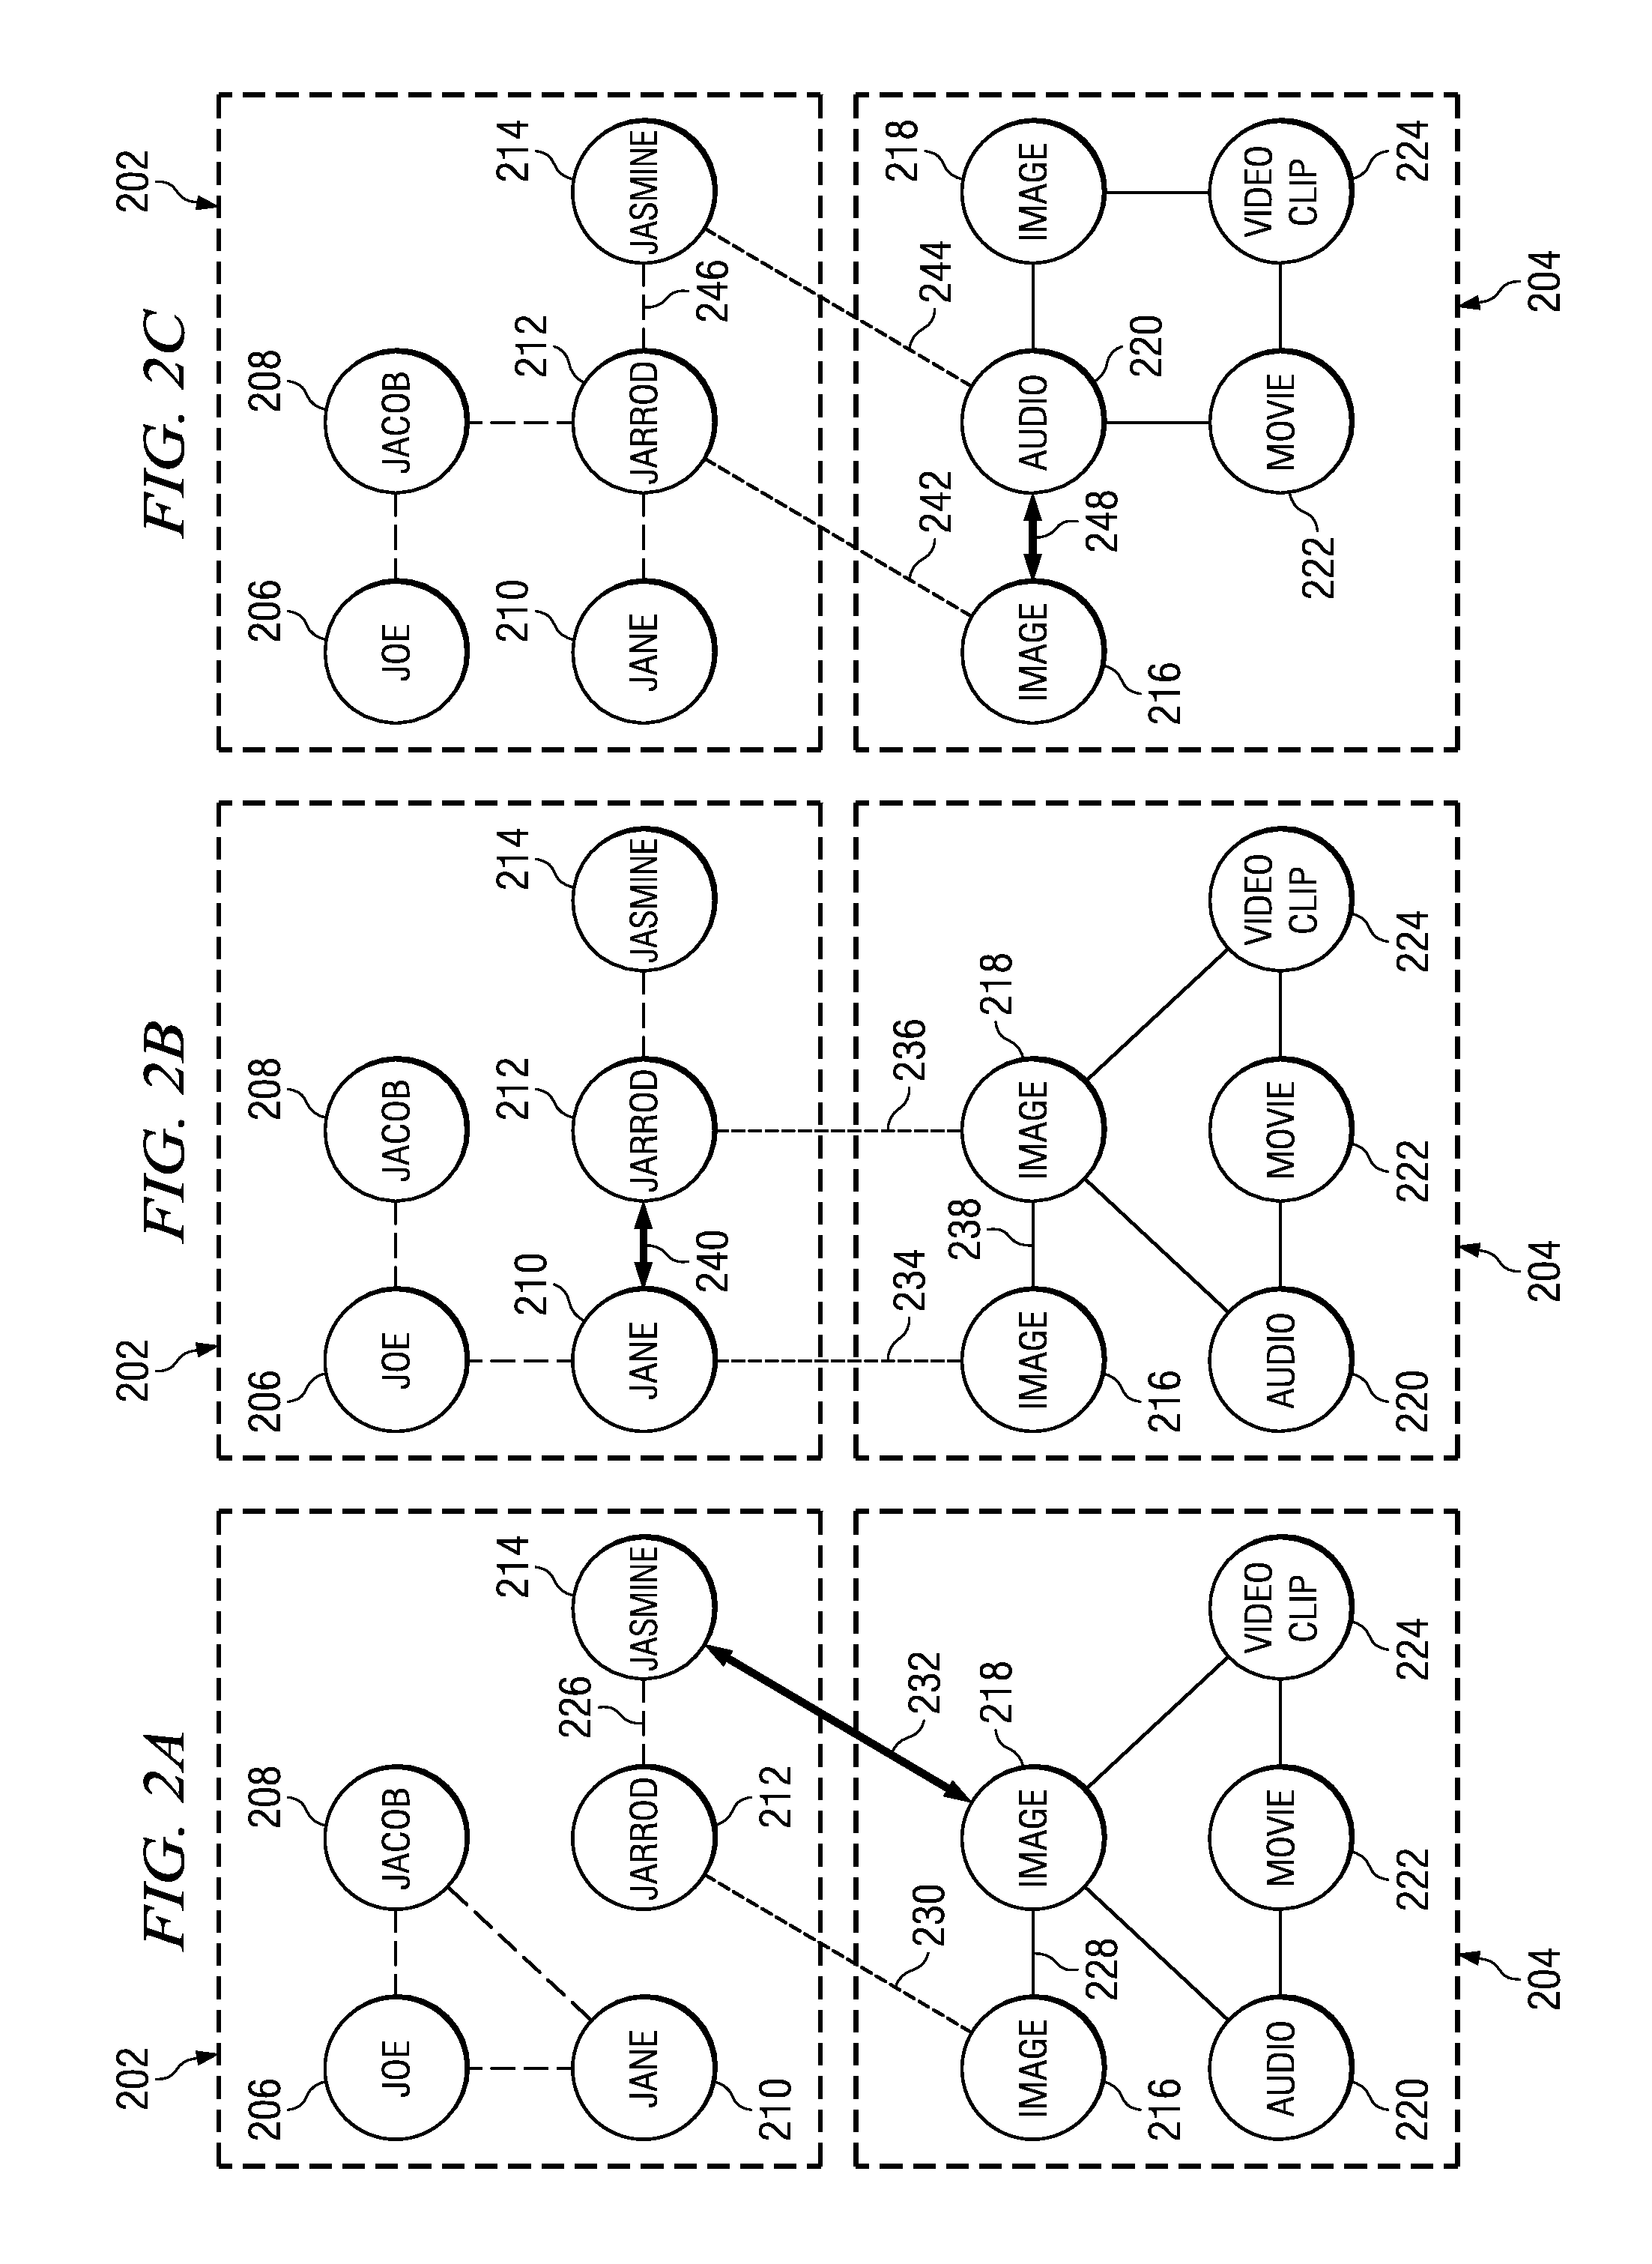 Method and apparatus for joint analysis of social and content networks